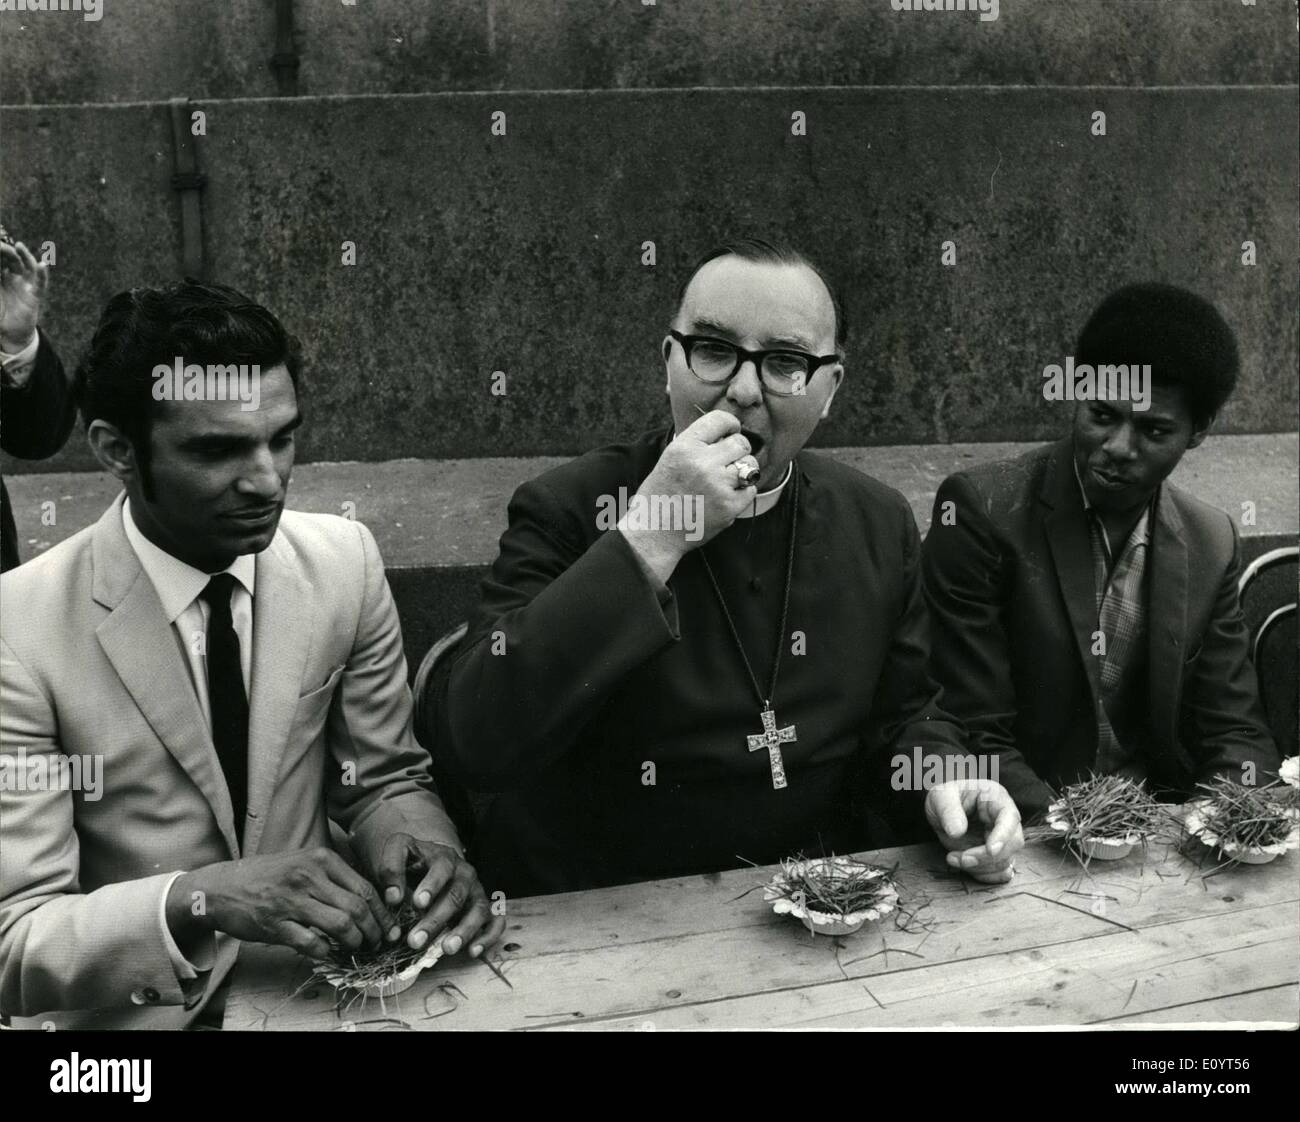 May 05, 1971 - Church Leader Invited To Eat Grass During Christian Aid Demonstration In Trafalgar Square: Church leaders were asked by young Africans and Asians to sit with them in Trafalgar Square today and share a meal of grass during a Christian Aid Demonstration. Grass, they say, is sometimes the only 'food' available to some of the World's poor - and taken on an empty stomach it can be killer Stock Photo